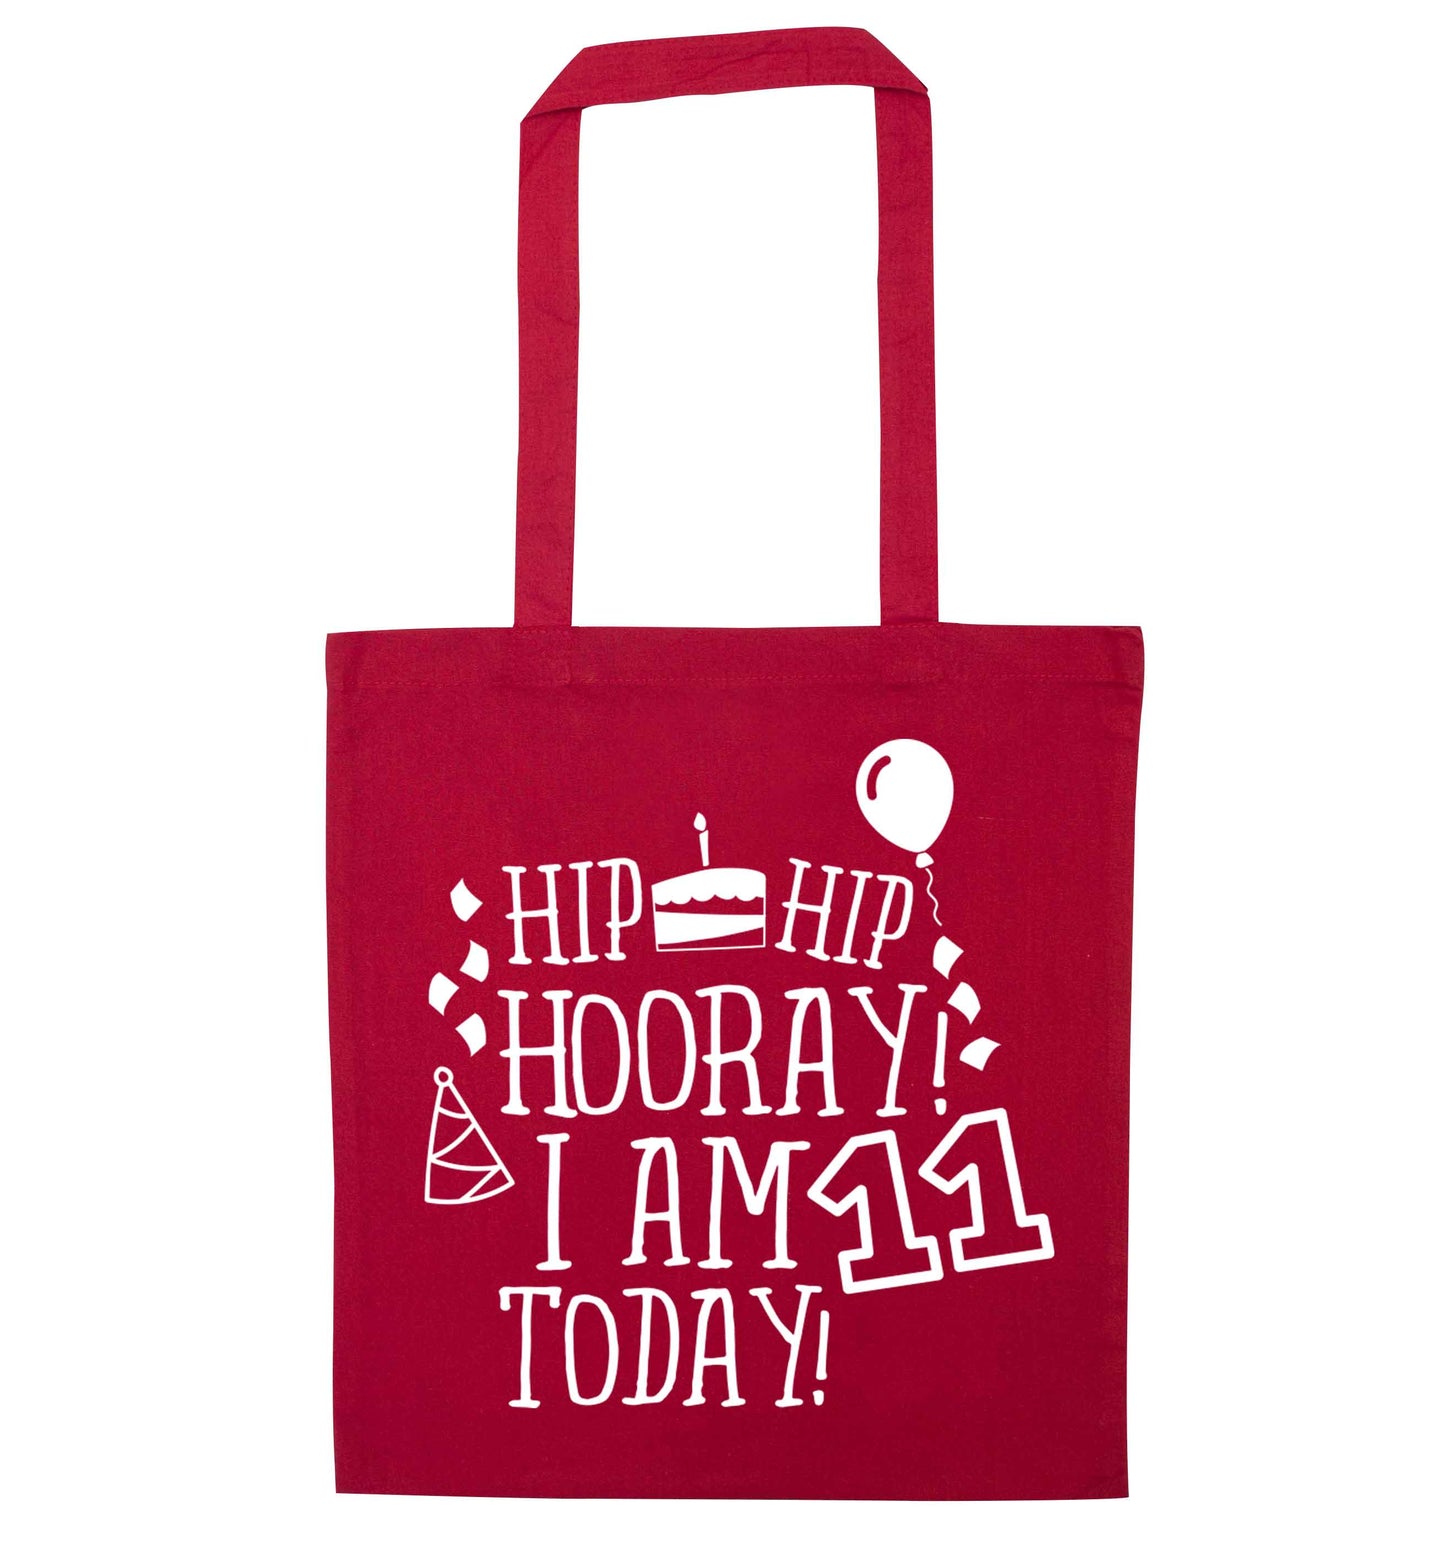 Hip hip hooray I am eleven today! red tote bag